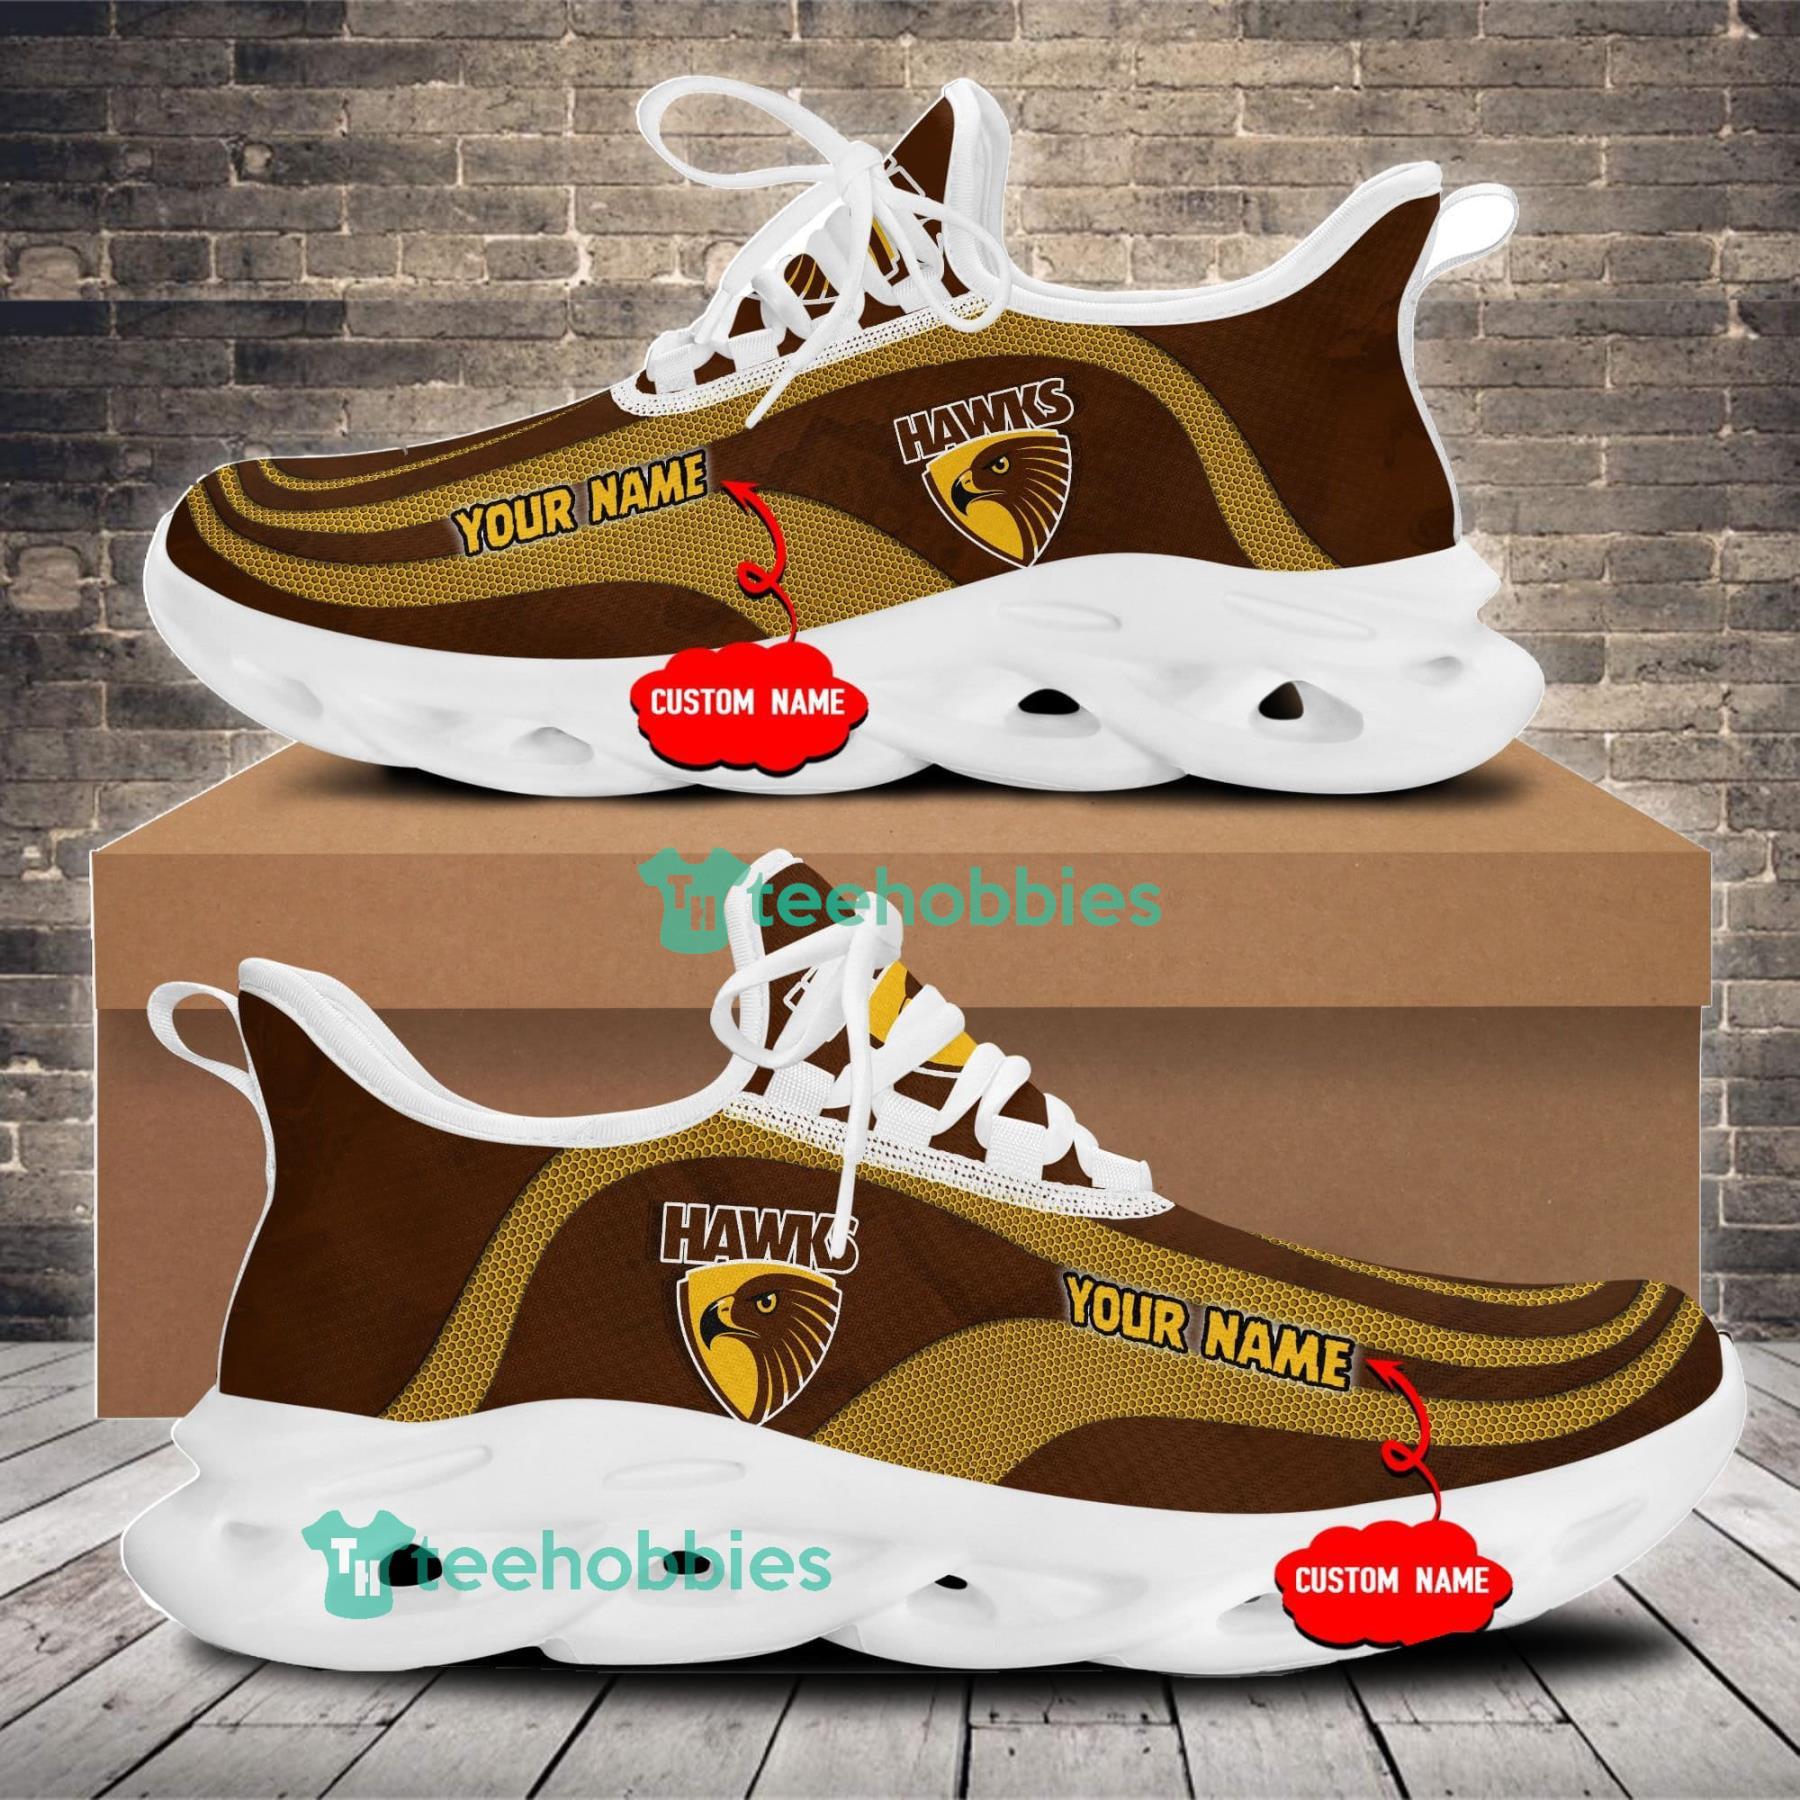 Hawthorn Custom Name Football Club Sneakers Max Soul Shoes For Men And Women Product Photo 1